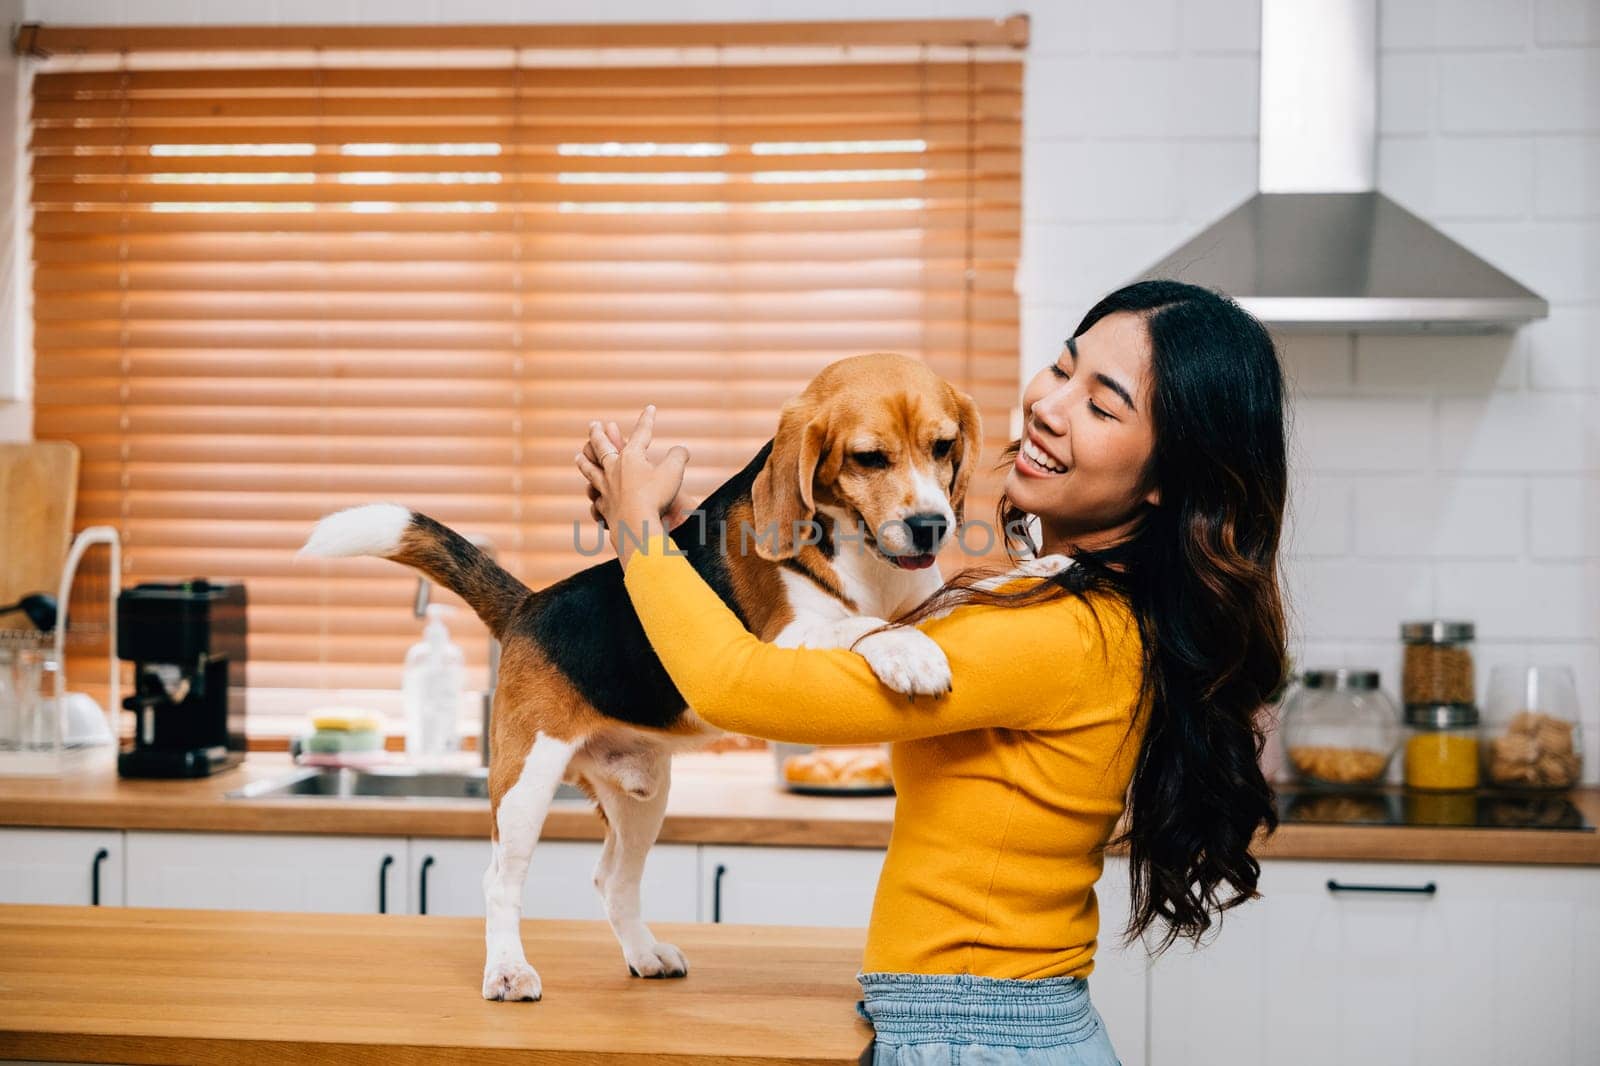 In the cozy kitchen, a smiling Asian woman finds joy playing with her Beagle dog. Their bond showcases the happiness, togetherness, and owner-pet friendship that bring fun to the family. Pet love by Sorapop